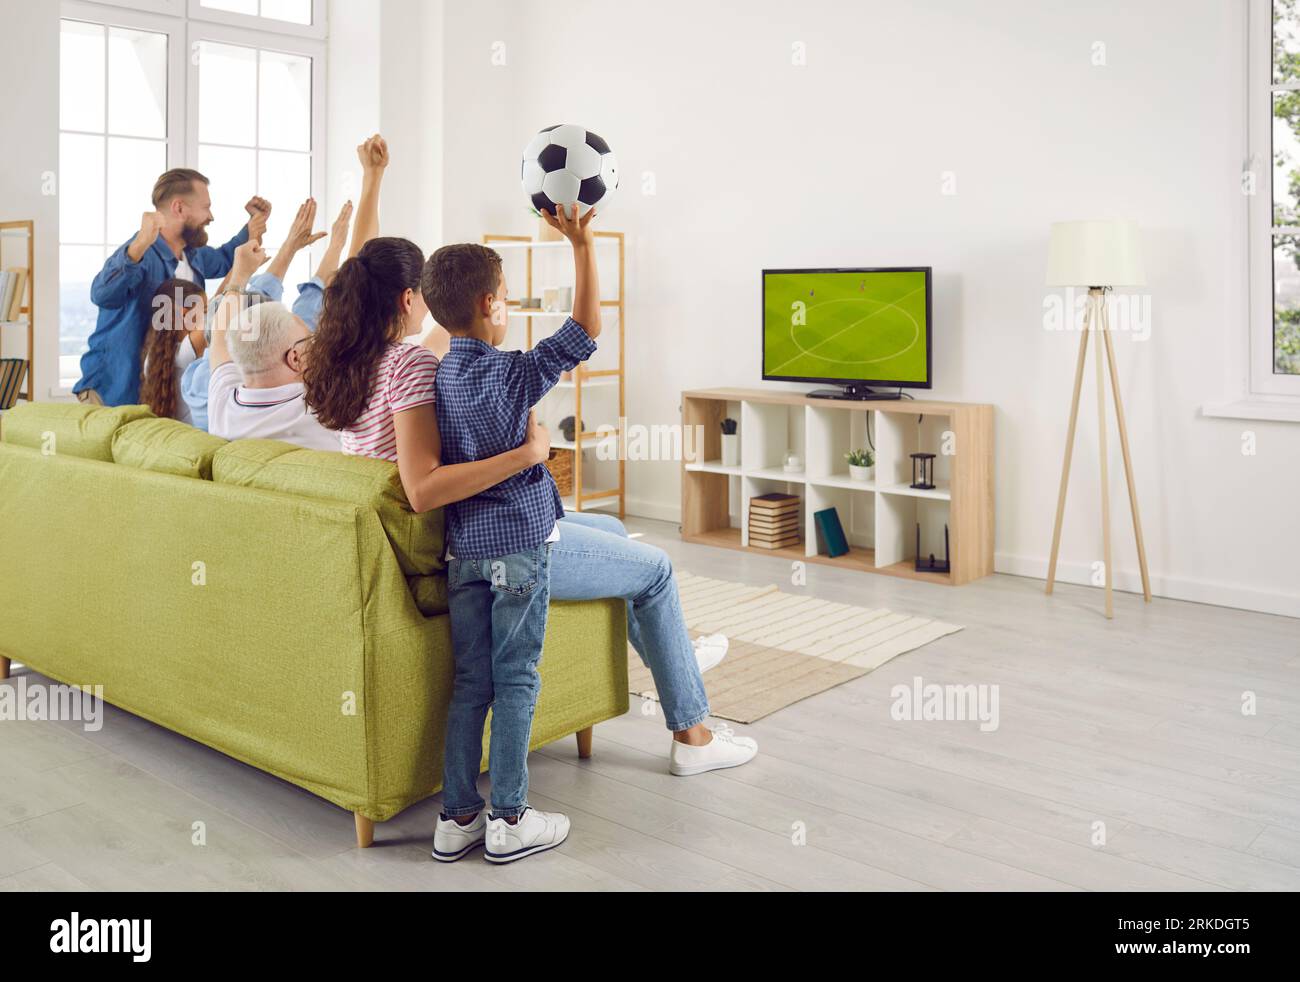 Happy, excited family sitting on couch in living room and watching football match on TV Stock Photo